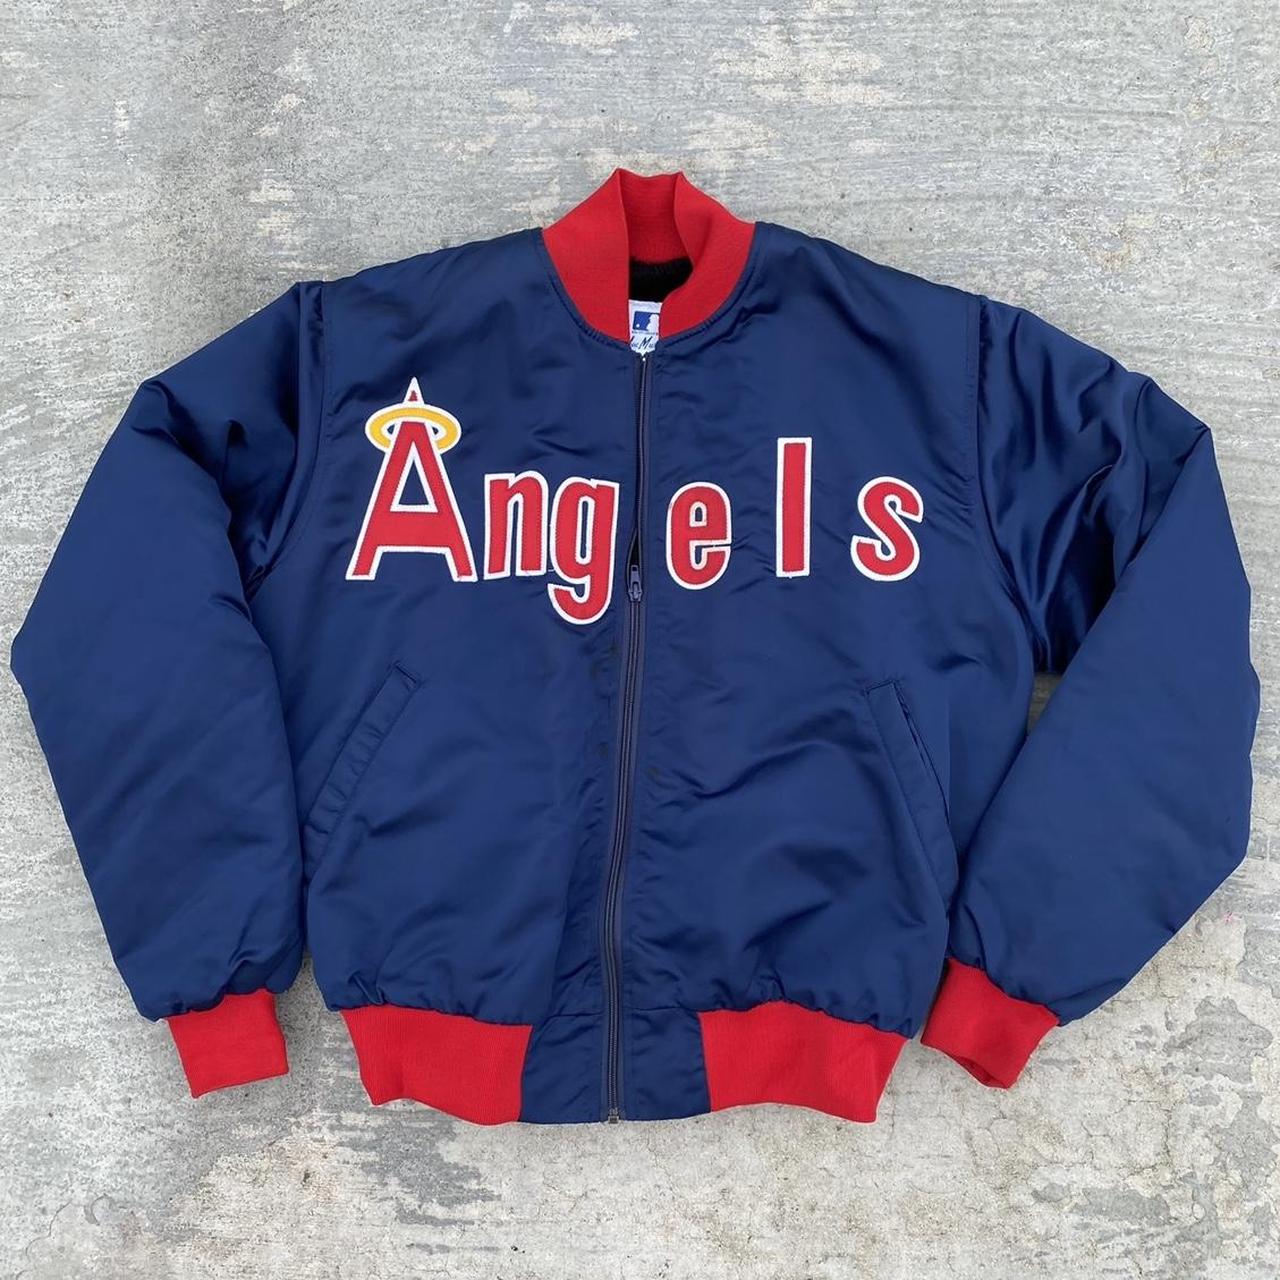 Vintage 80s Angels Jacket Made in USA. Features - Depop